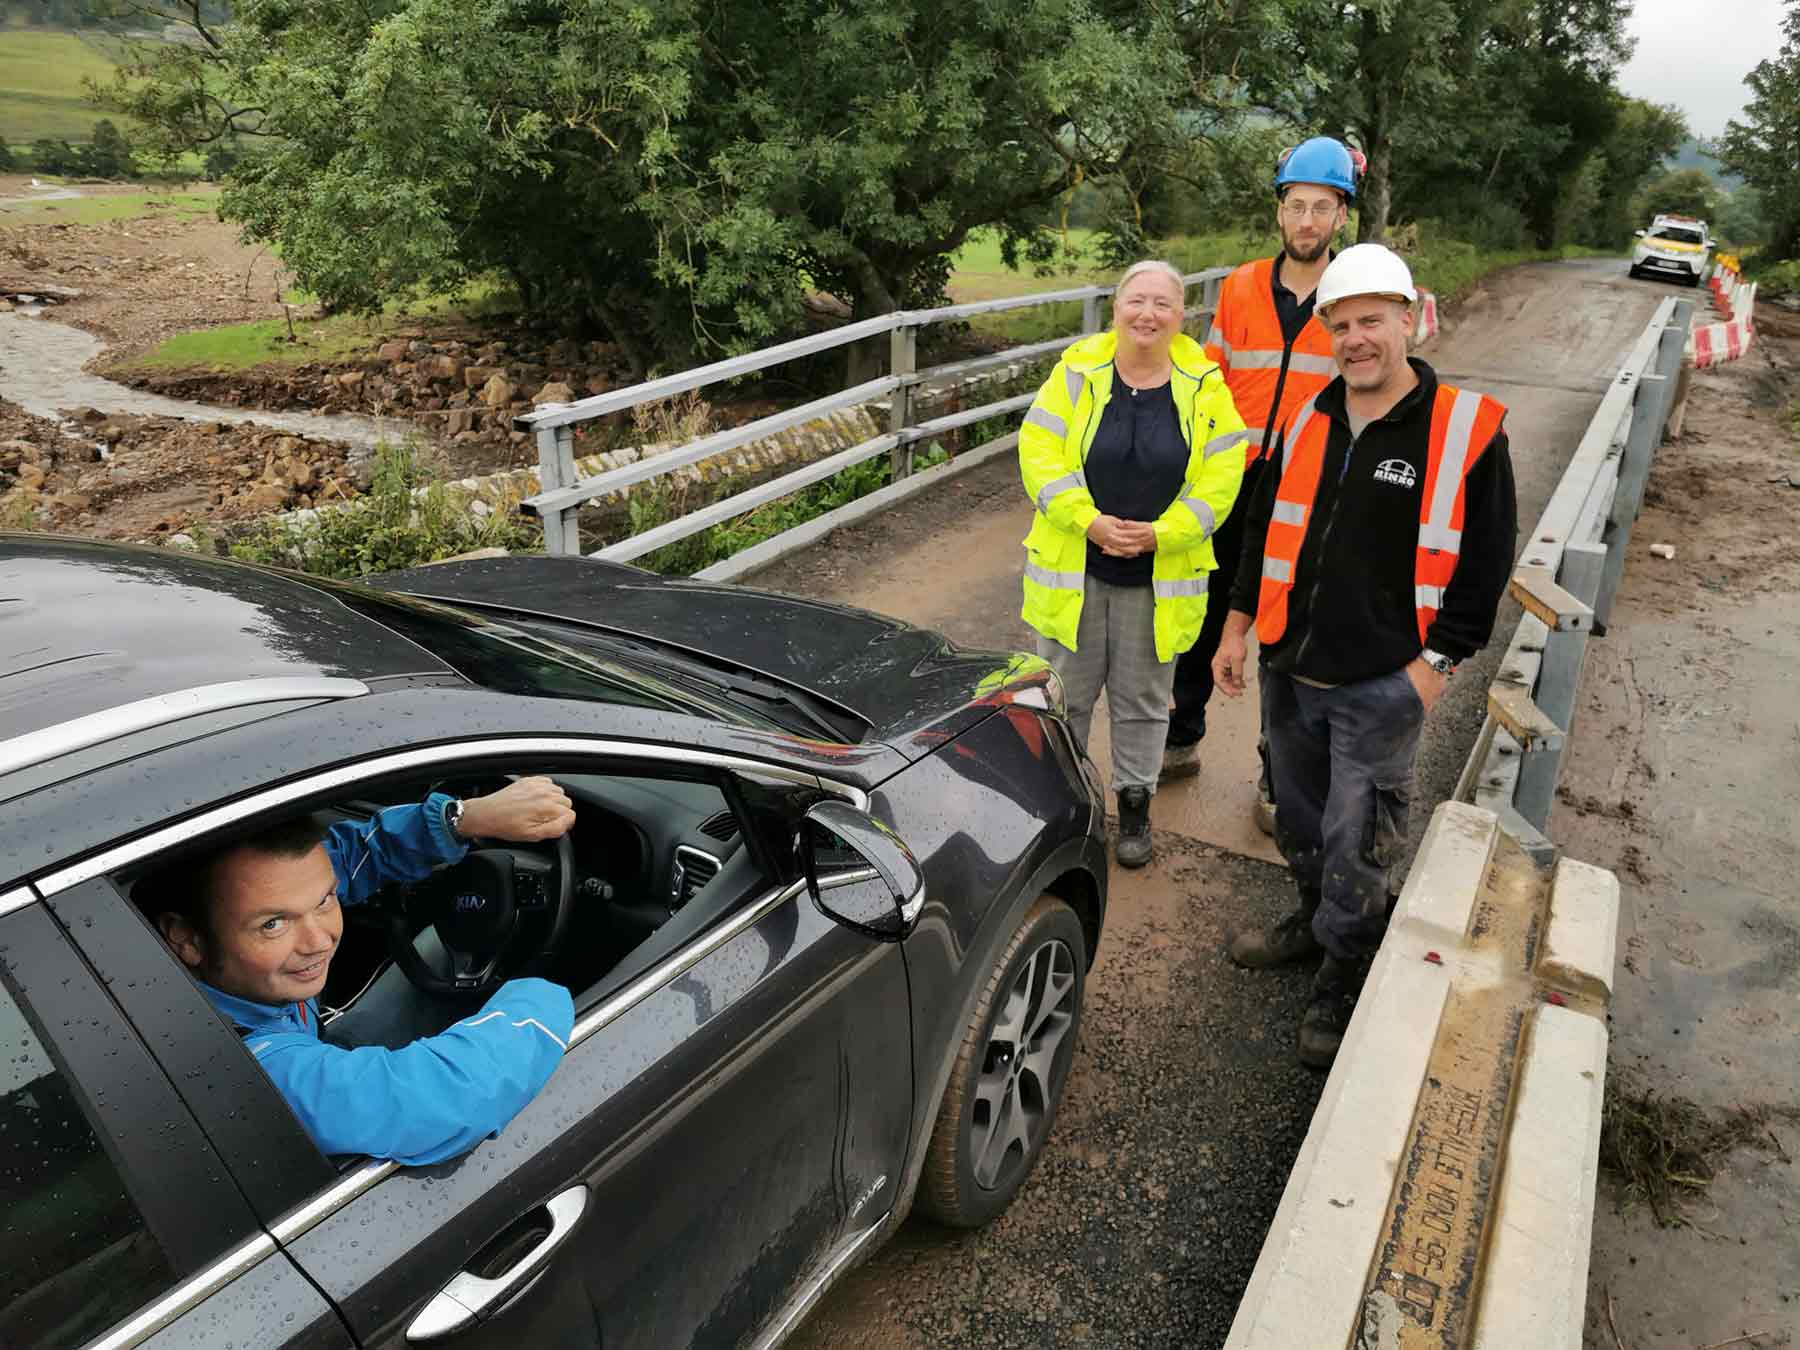 Pictured, Andrew Atkin, landlord of The Bridge Inn at Grinton, prepares to be the first person to drive along the reopened section of the B6270 this afternoon, watched by (from left) Deborah Flowers, County Council highways communication officer, Phil Richardson, senior engineer from the County Council’s bridges team, and Andy Lacy, director of contractor Hinko